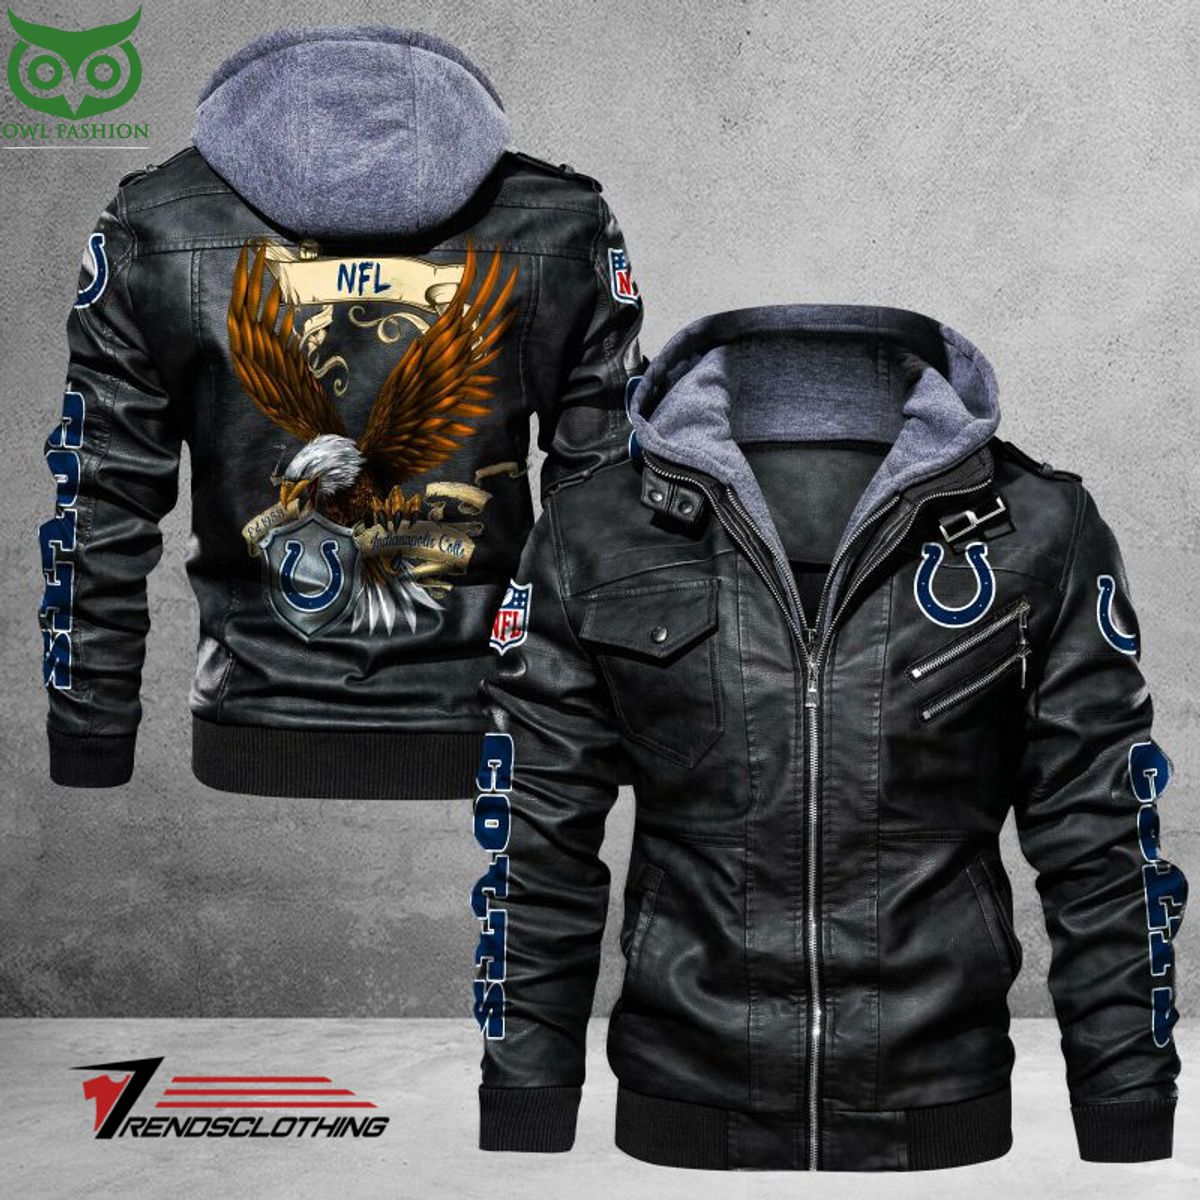 Indianapolis Colts Trending 2D Leather Jacket Good one dear